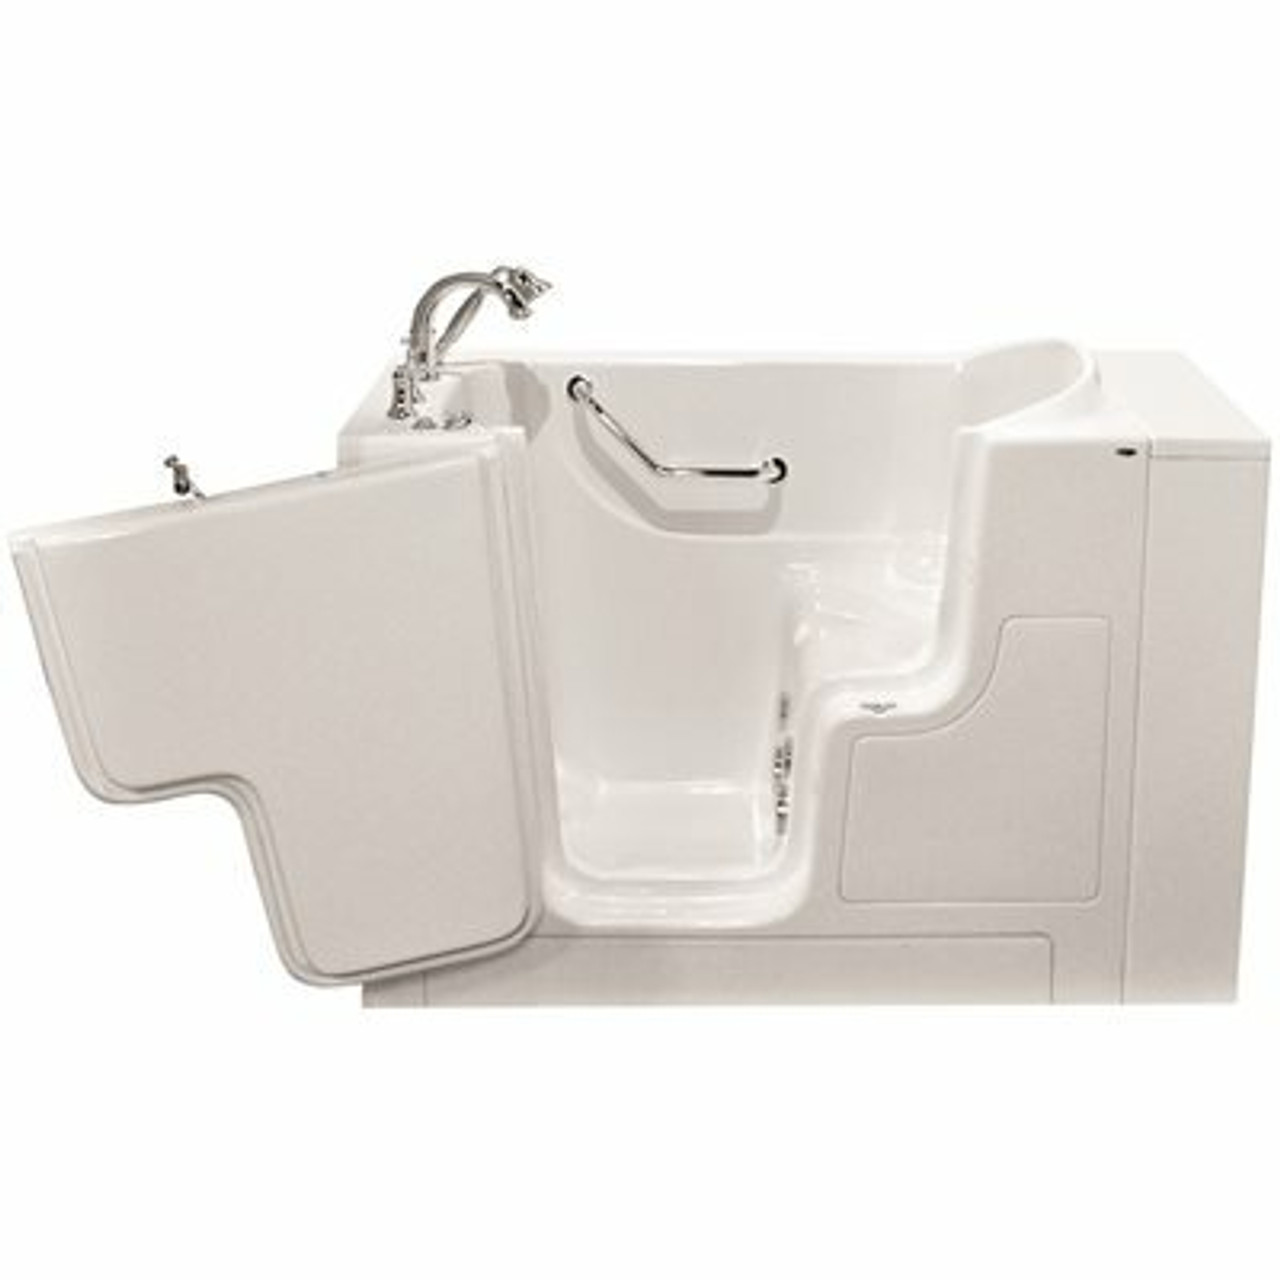 American Standard Gelcoat Walk-In Bath, Whirlpool, Left-Hand With Quick Drain And Faucet, White, 30 In. X 52 In. - 3559095